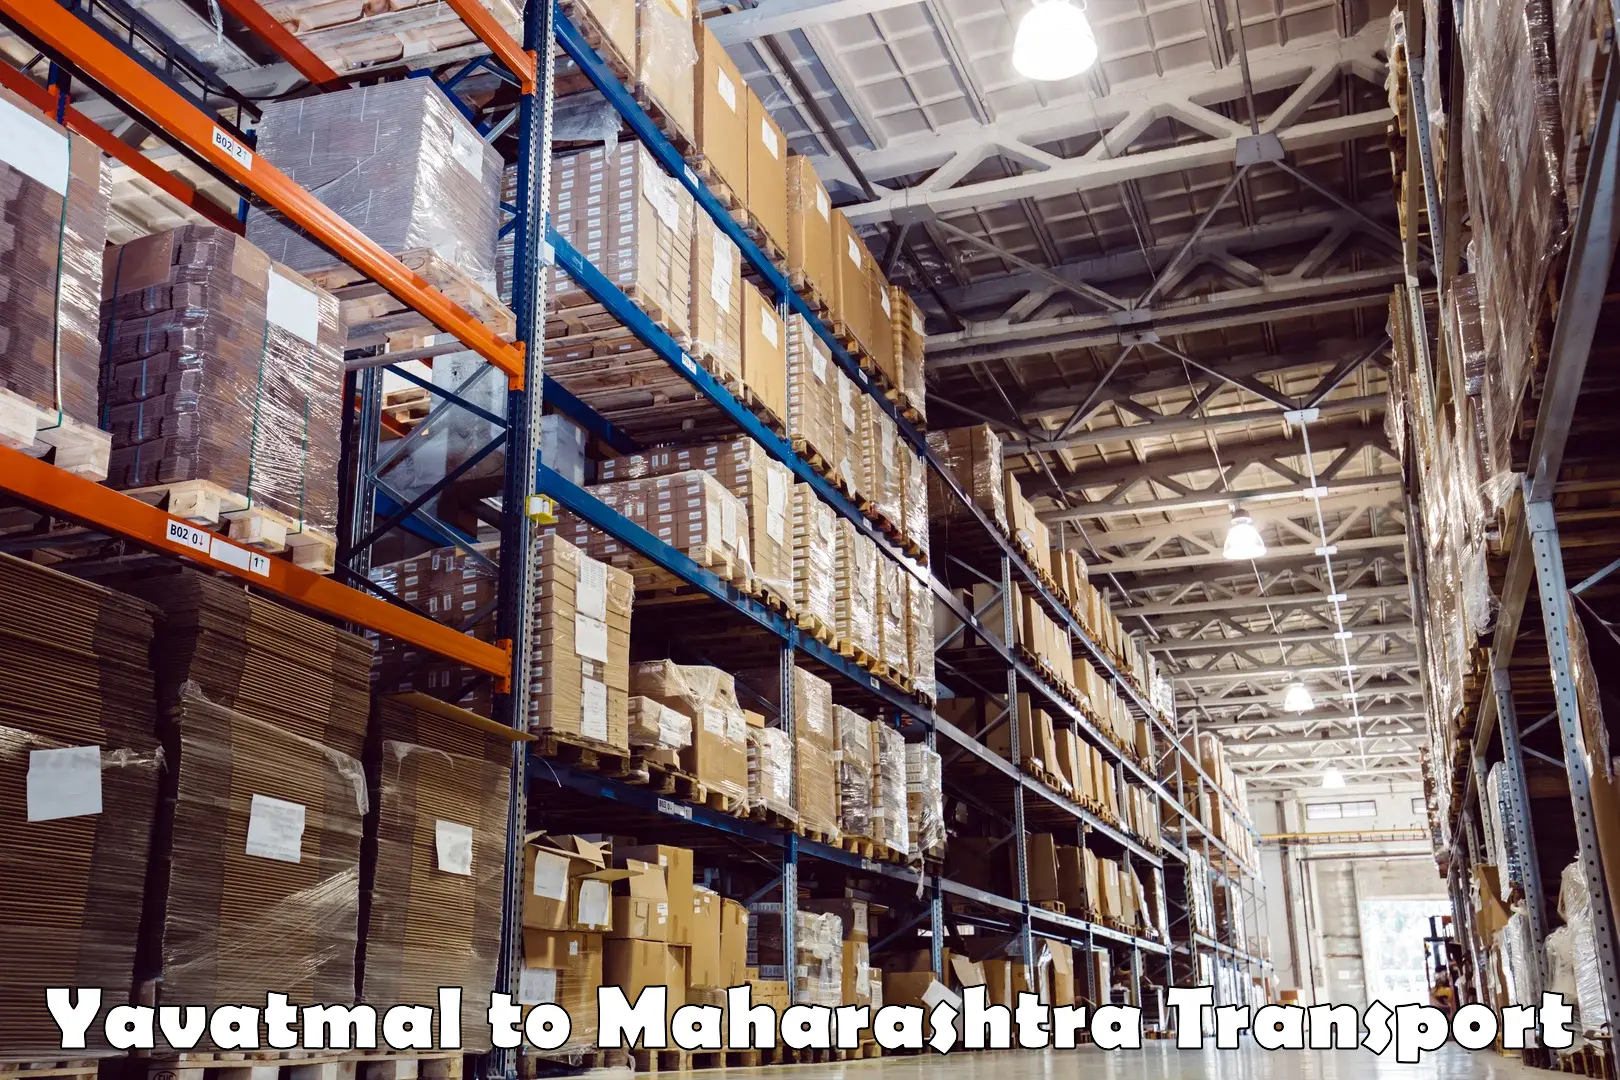 Air freight transport services Yavatmal to Nagothane